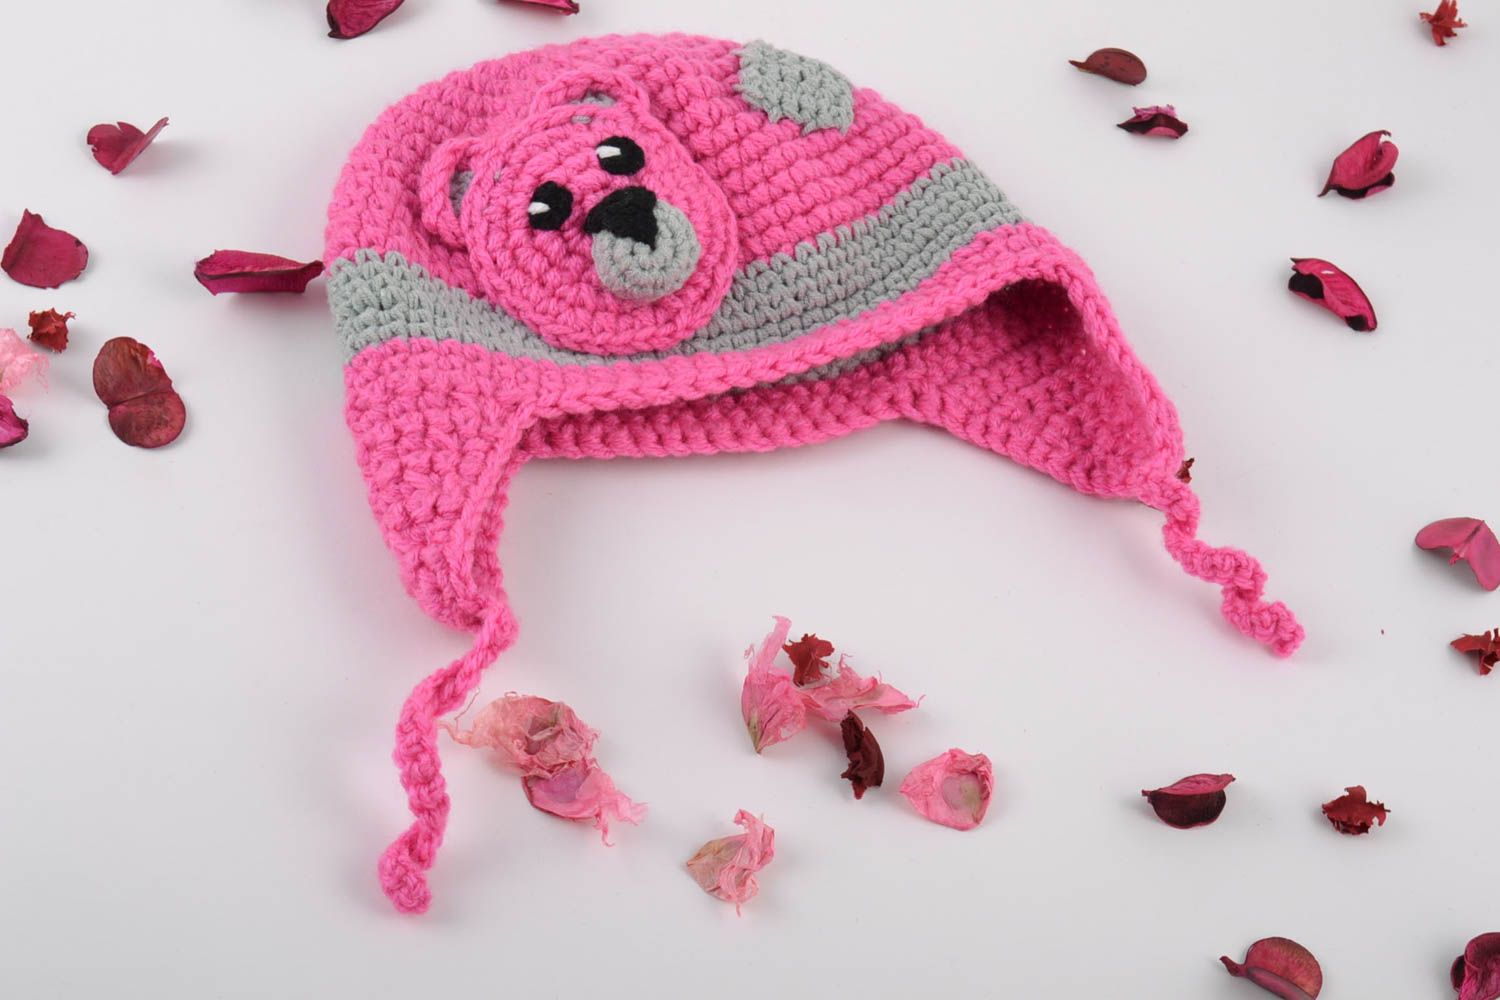 Handmade baby girl hat crocheted of pink and gray cotton threads with bear muzzle photo 1